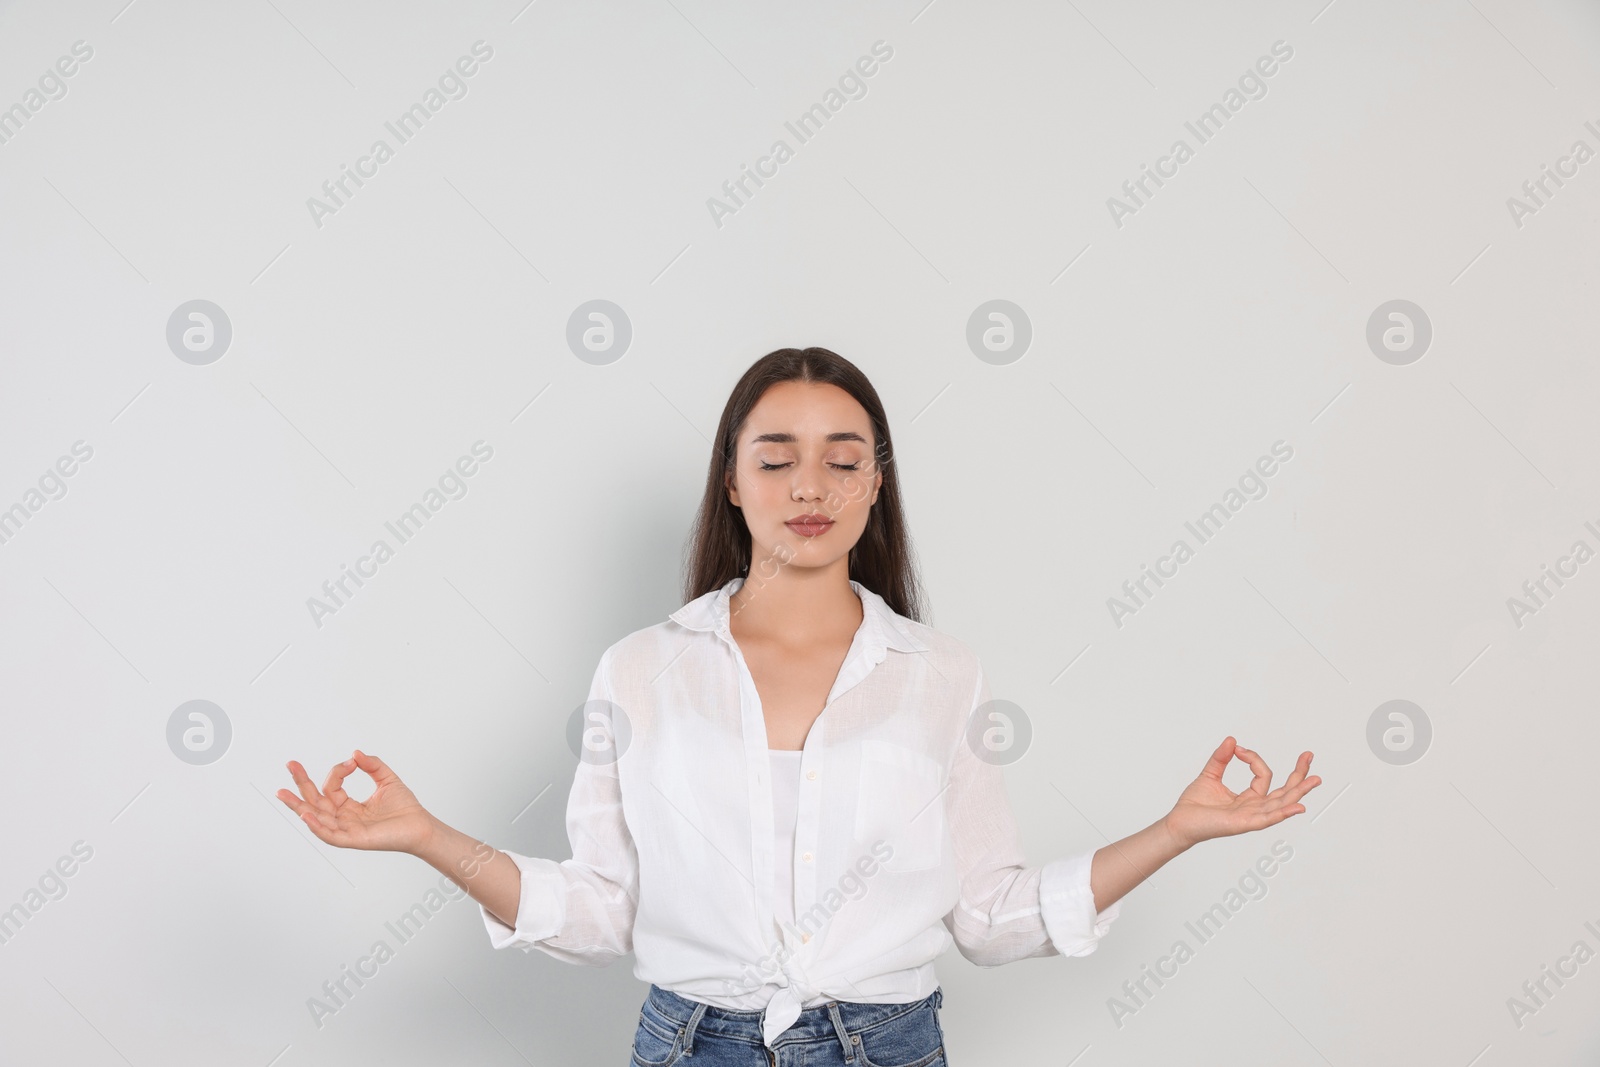 Photo of Find zen. Beautiful young woman meditating on white background